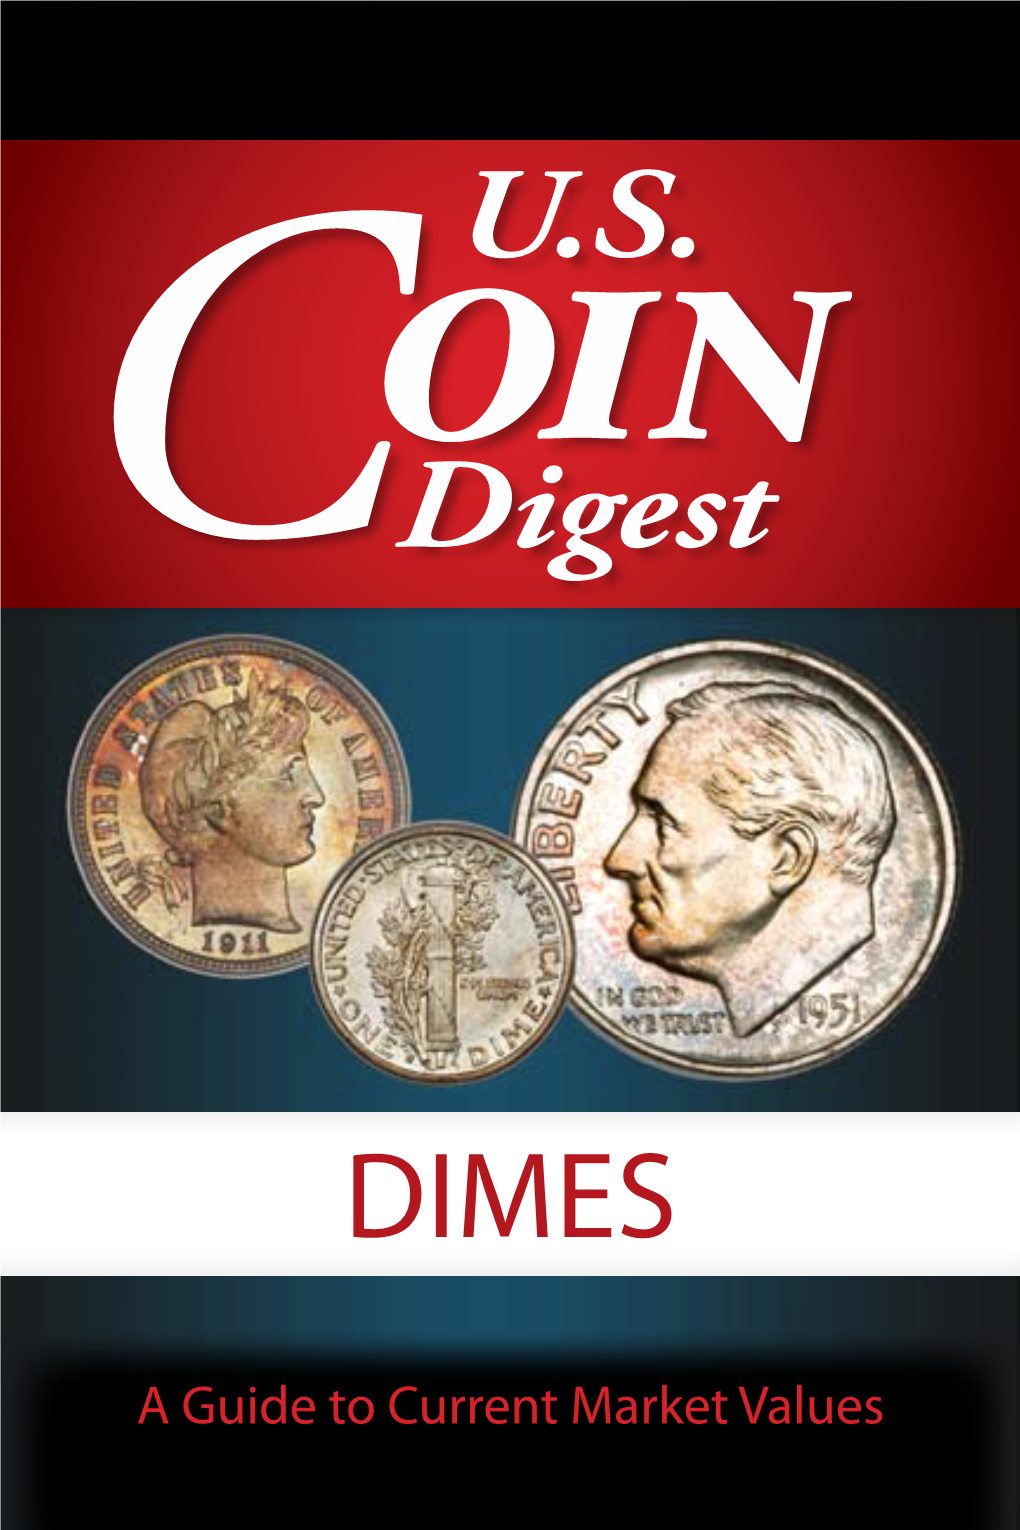 2018 U.S. Coin Digest, 16Th Edition